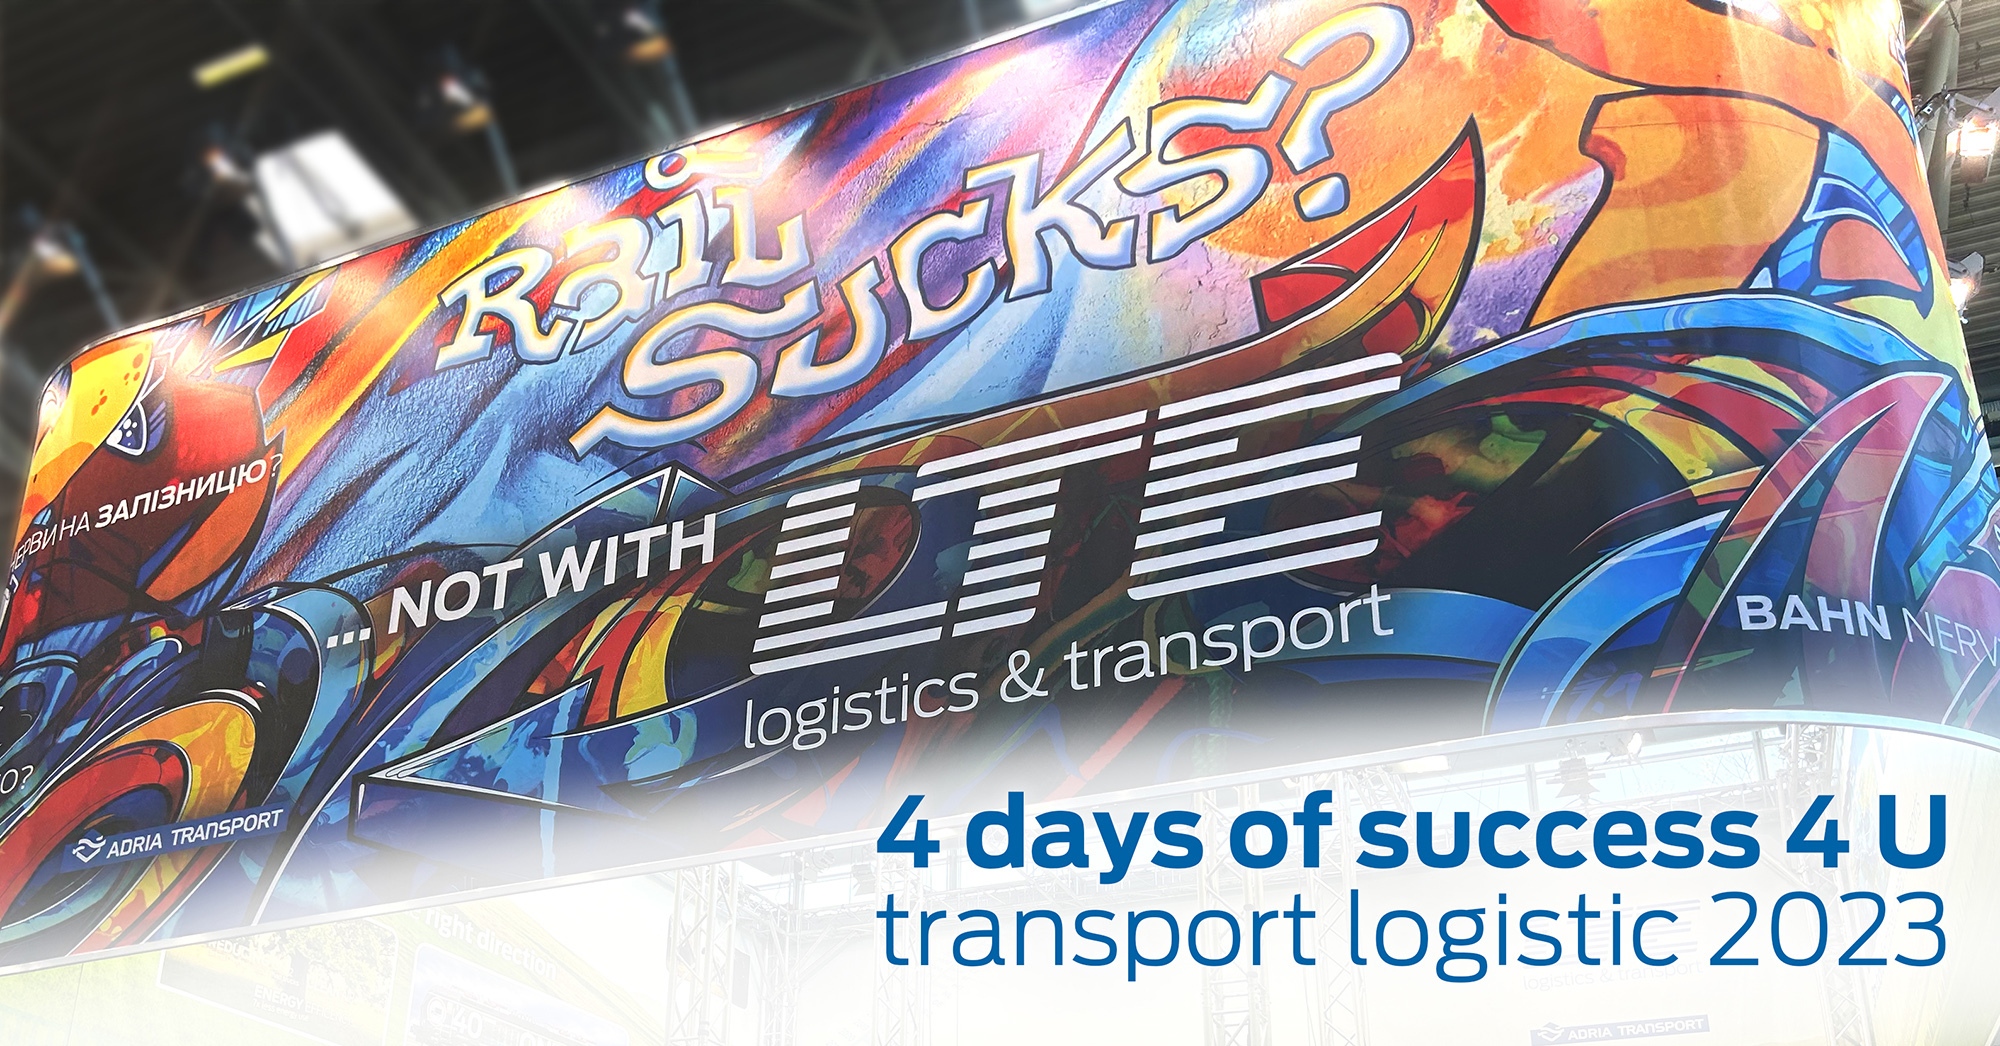 LTE-group @ transport & logistic - the review